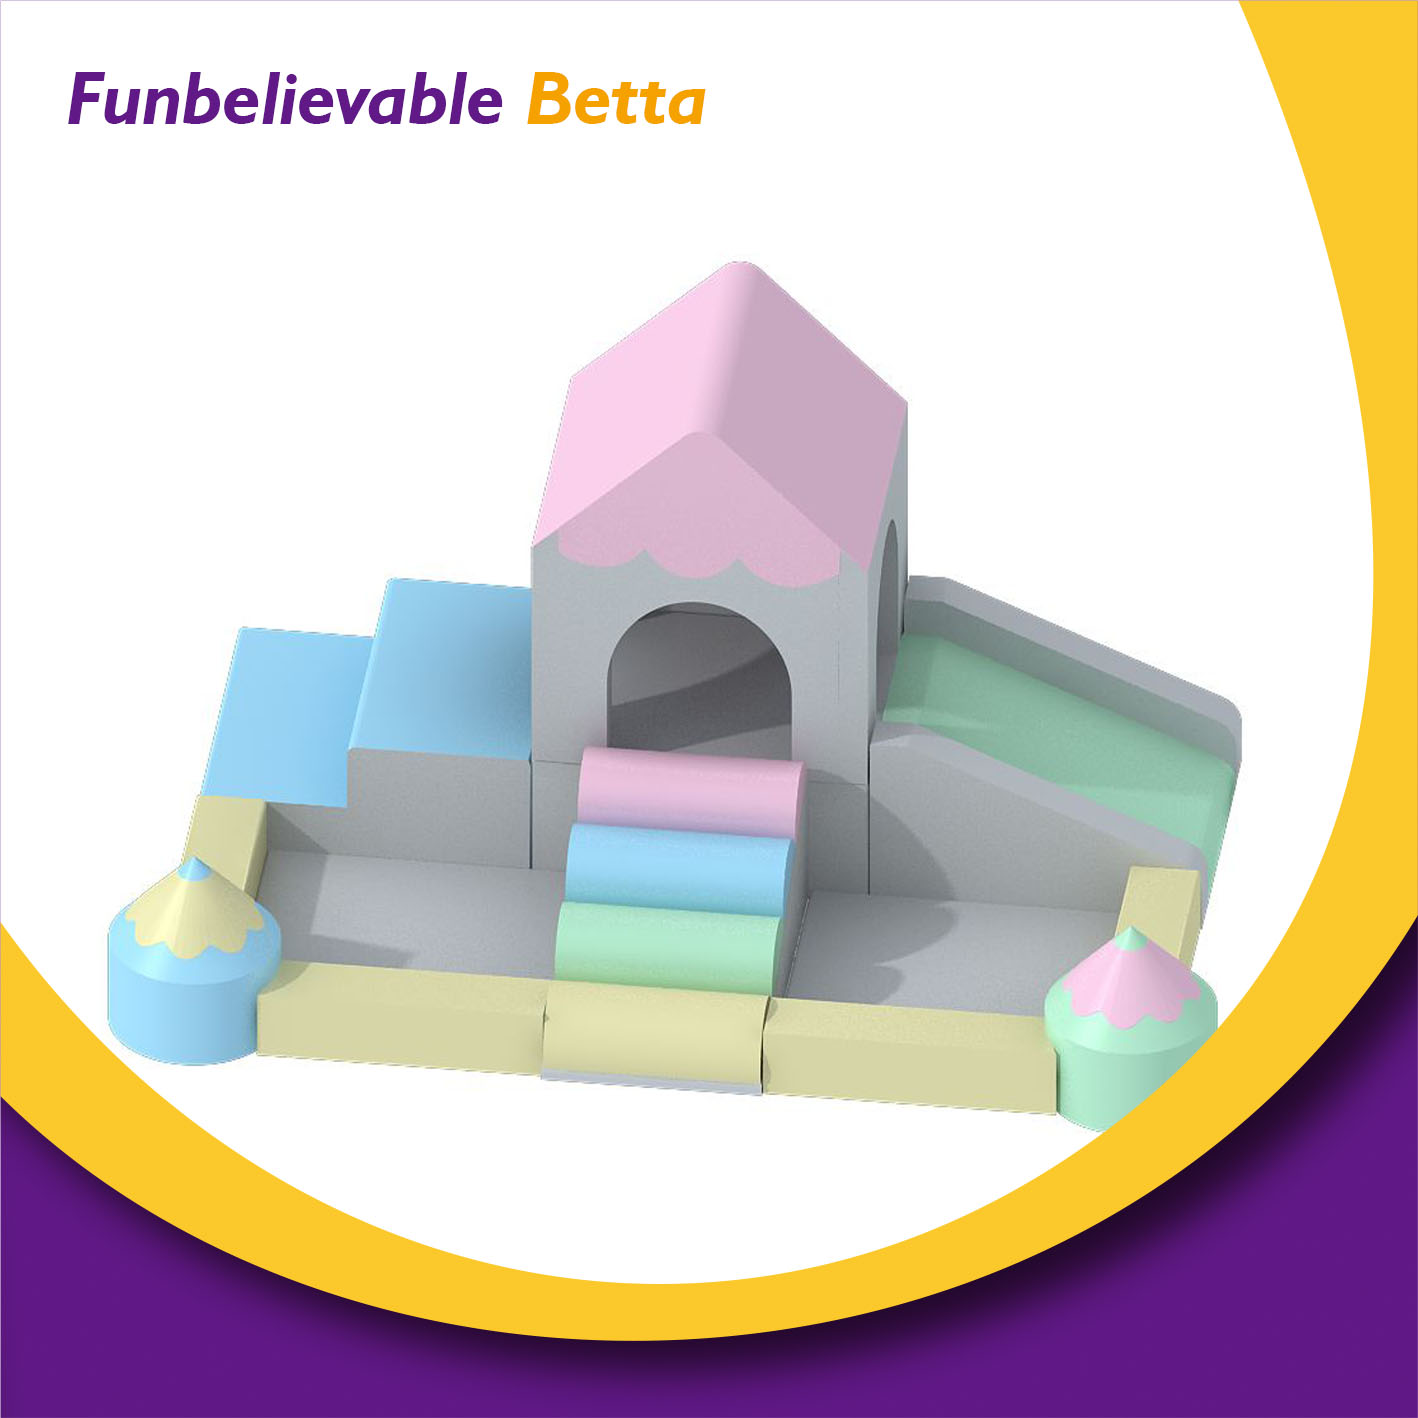 Bettaplay soft play party rental pencil castle soft play climbing and slide set for kids